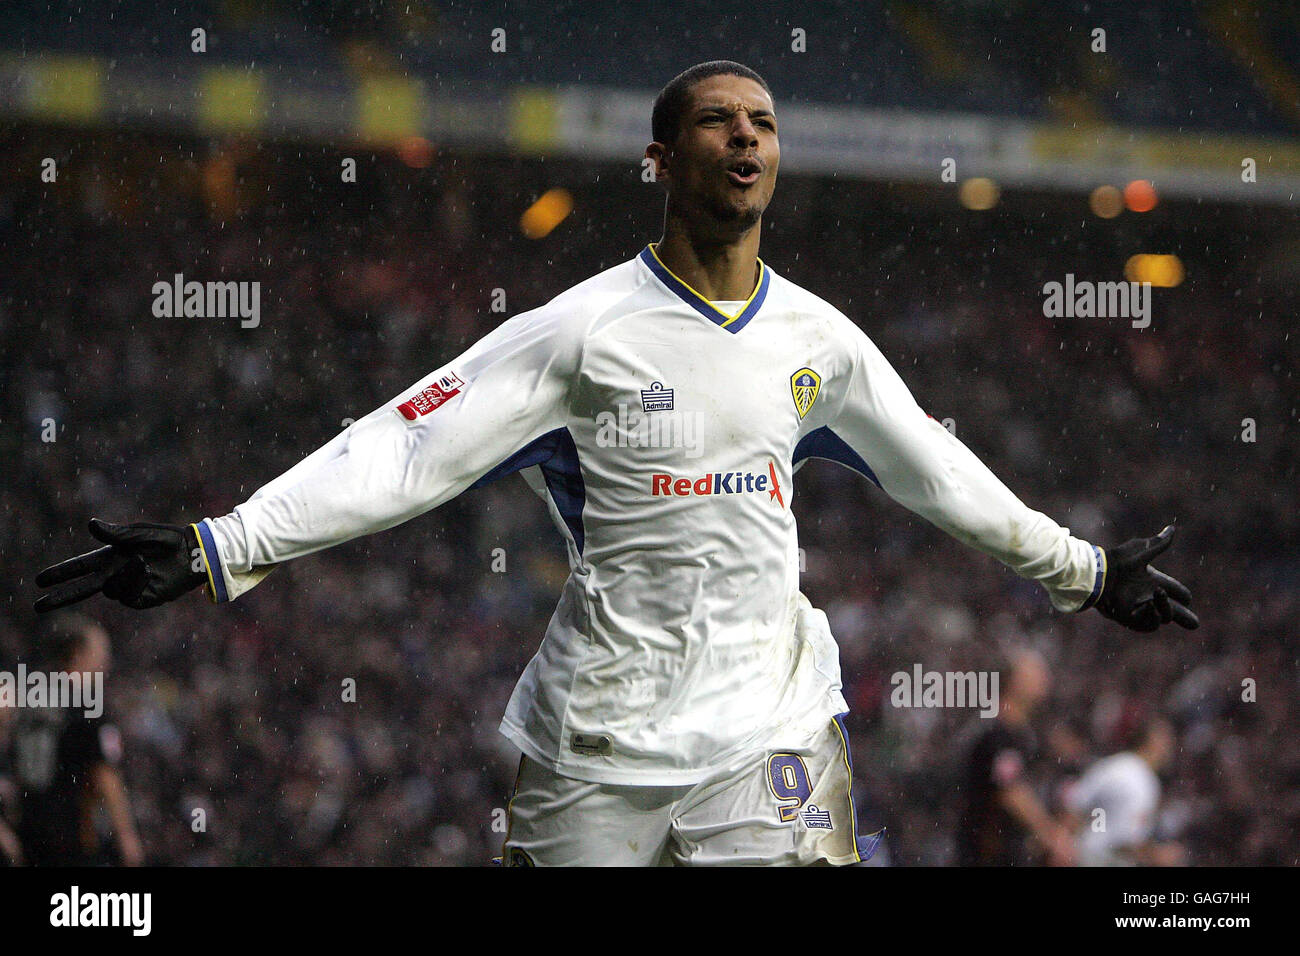 Leeds United's Jermaine Beckford celebrates his second goal during the Coca-Cola League One match at Elland Road, Leeds. Stock Photo